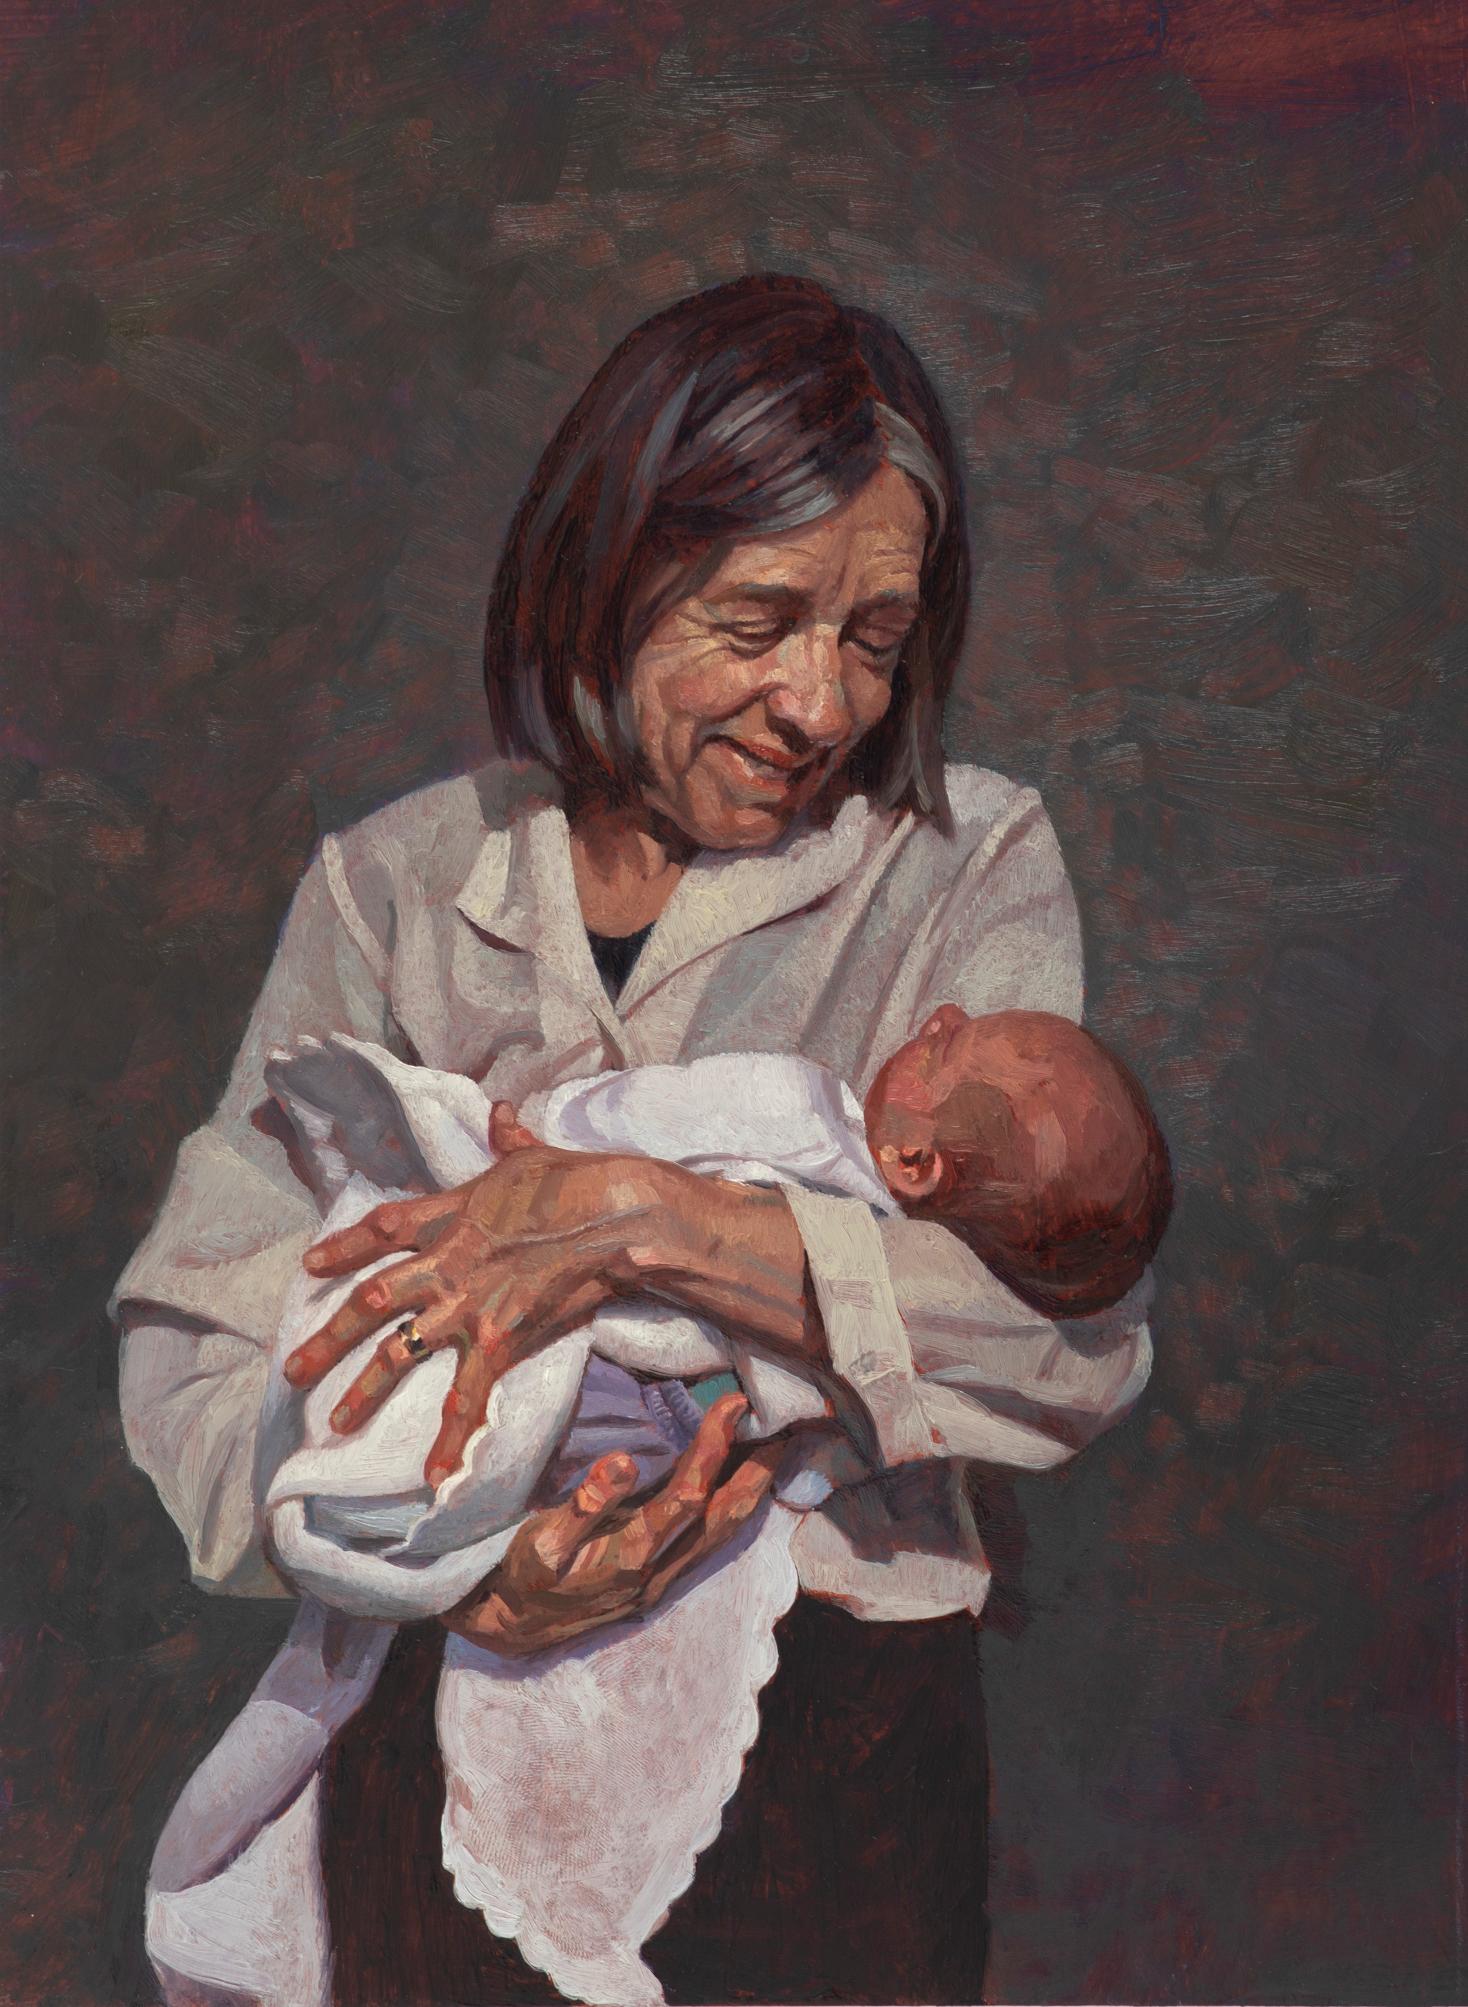 Mum’s portrait scoops top prize for Sam